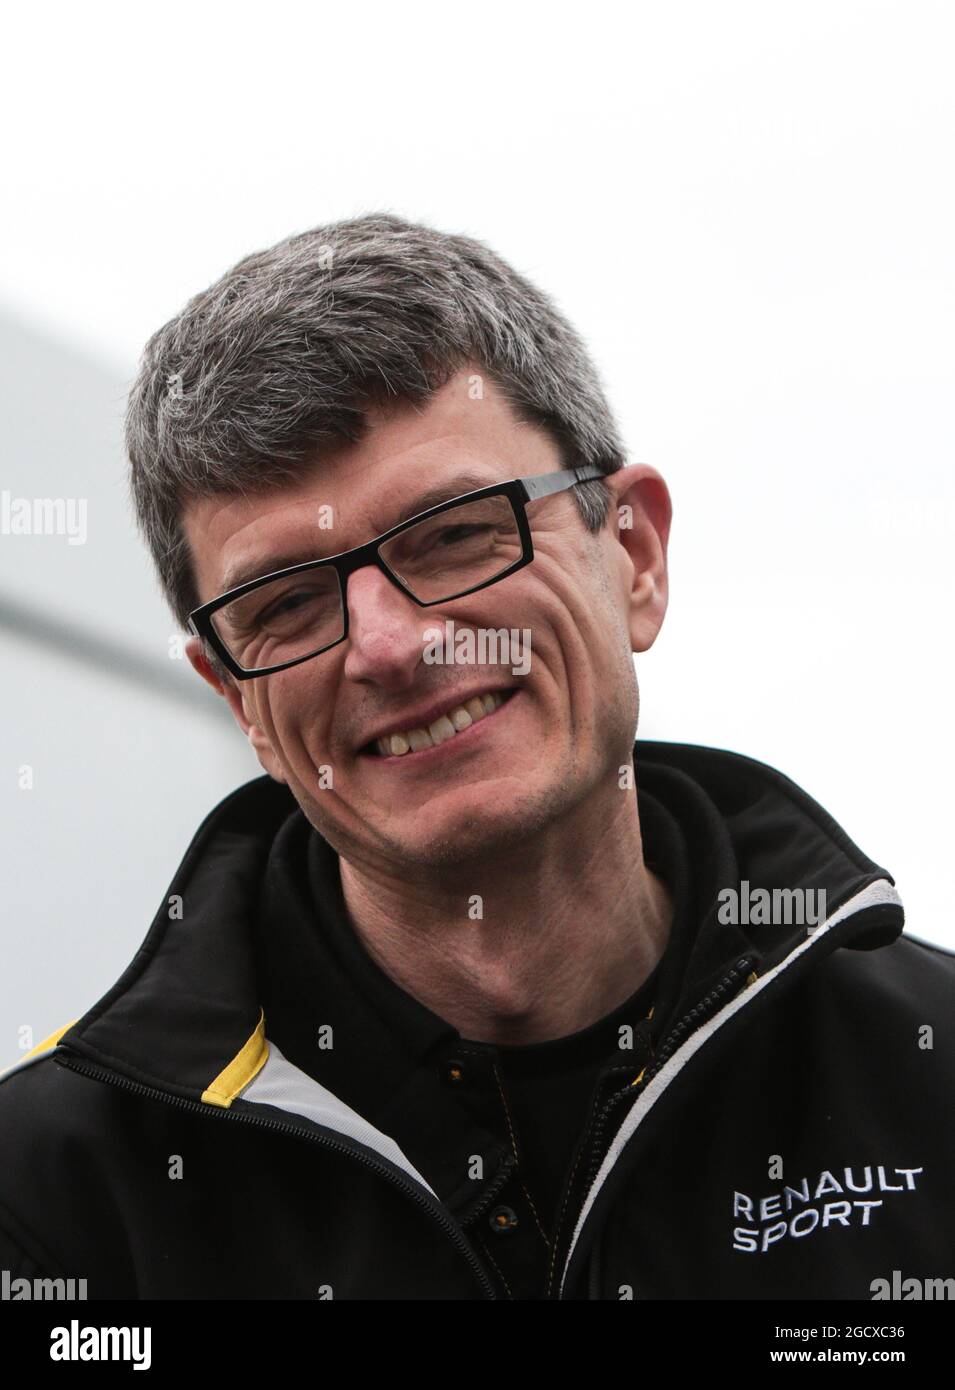 Chris Dyer Aus Renault Sport F1 Team Head Of Vehicle Performance Formula One Testing Day 2 Tuesday 28th February 17 Barcelona Spain Stock Photo Alamy